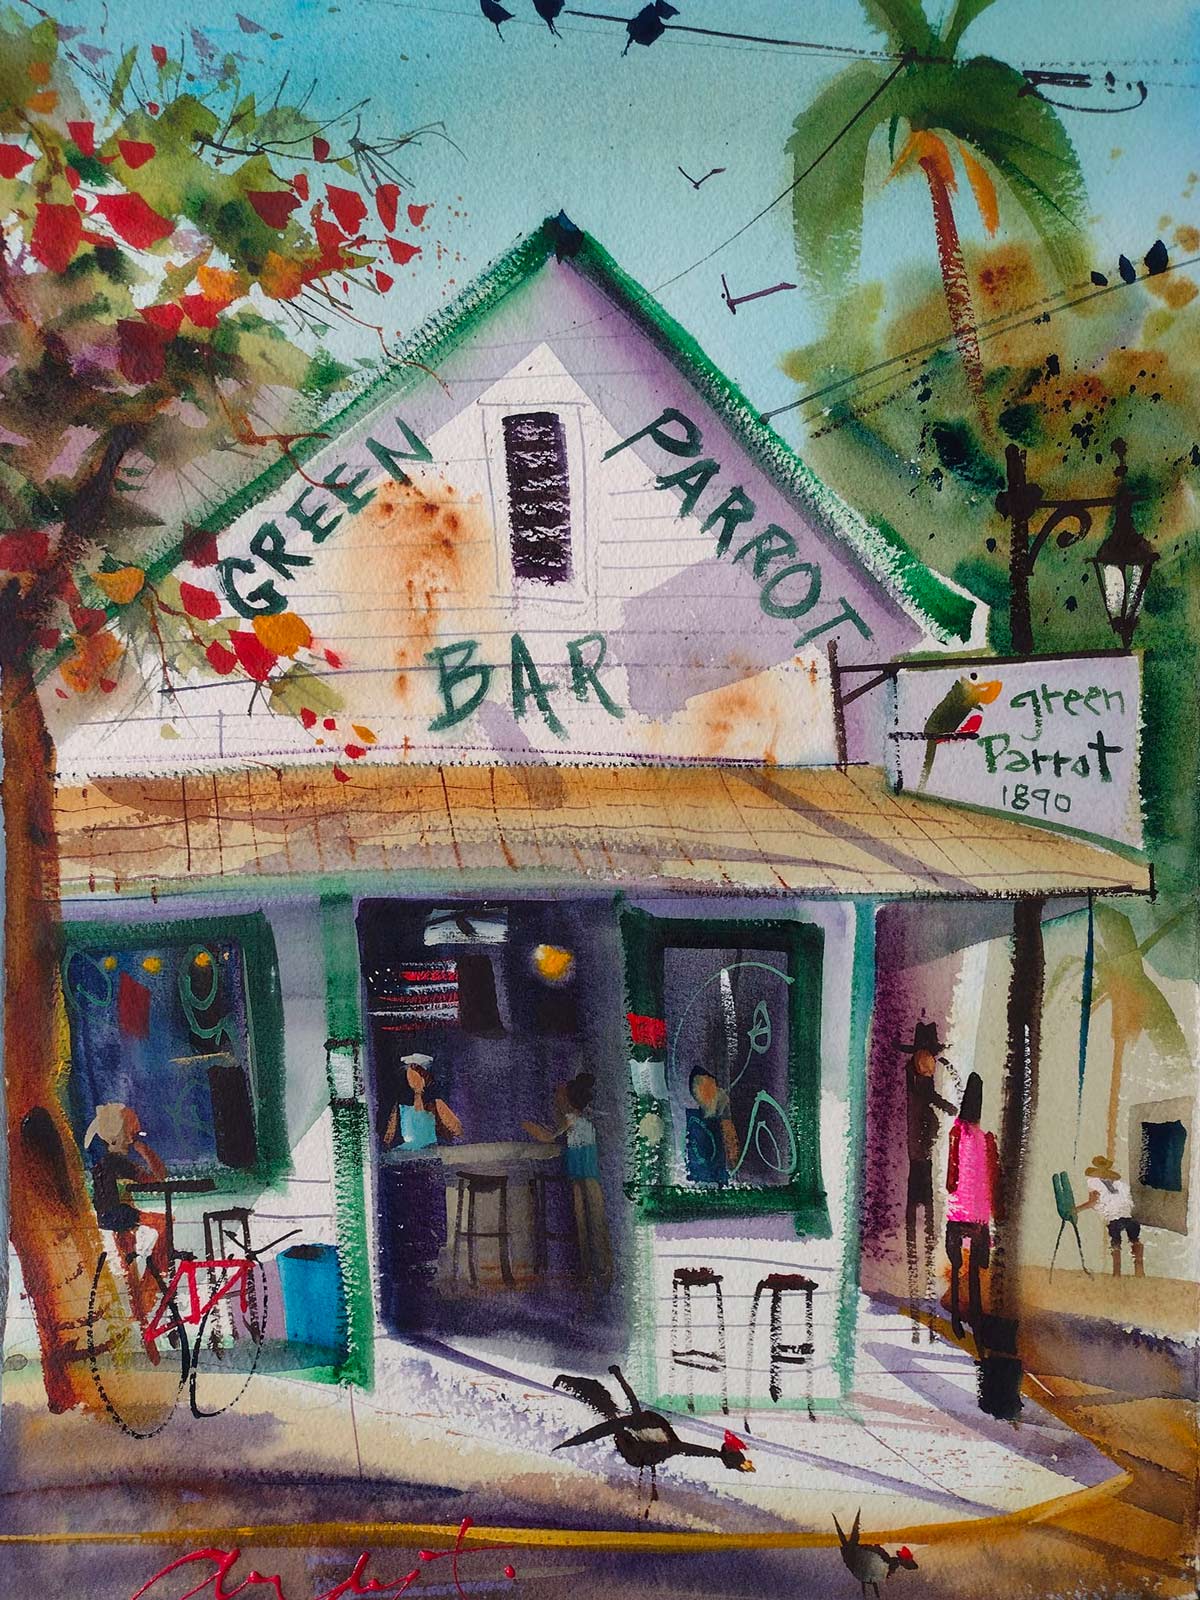 Original works by renowned local Thurber and rising artist Dwyer that emphasize the immediacy of plein air and the spontaneity of watercolor while capturing the tropical colors and diversity of our community.